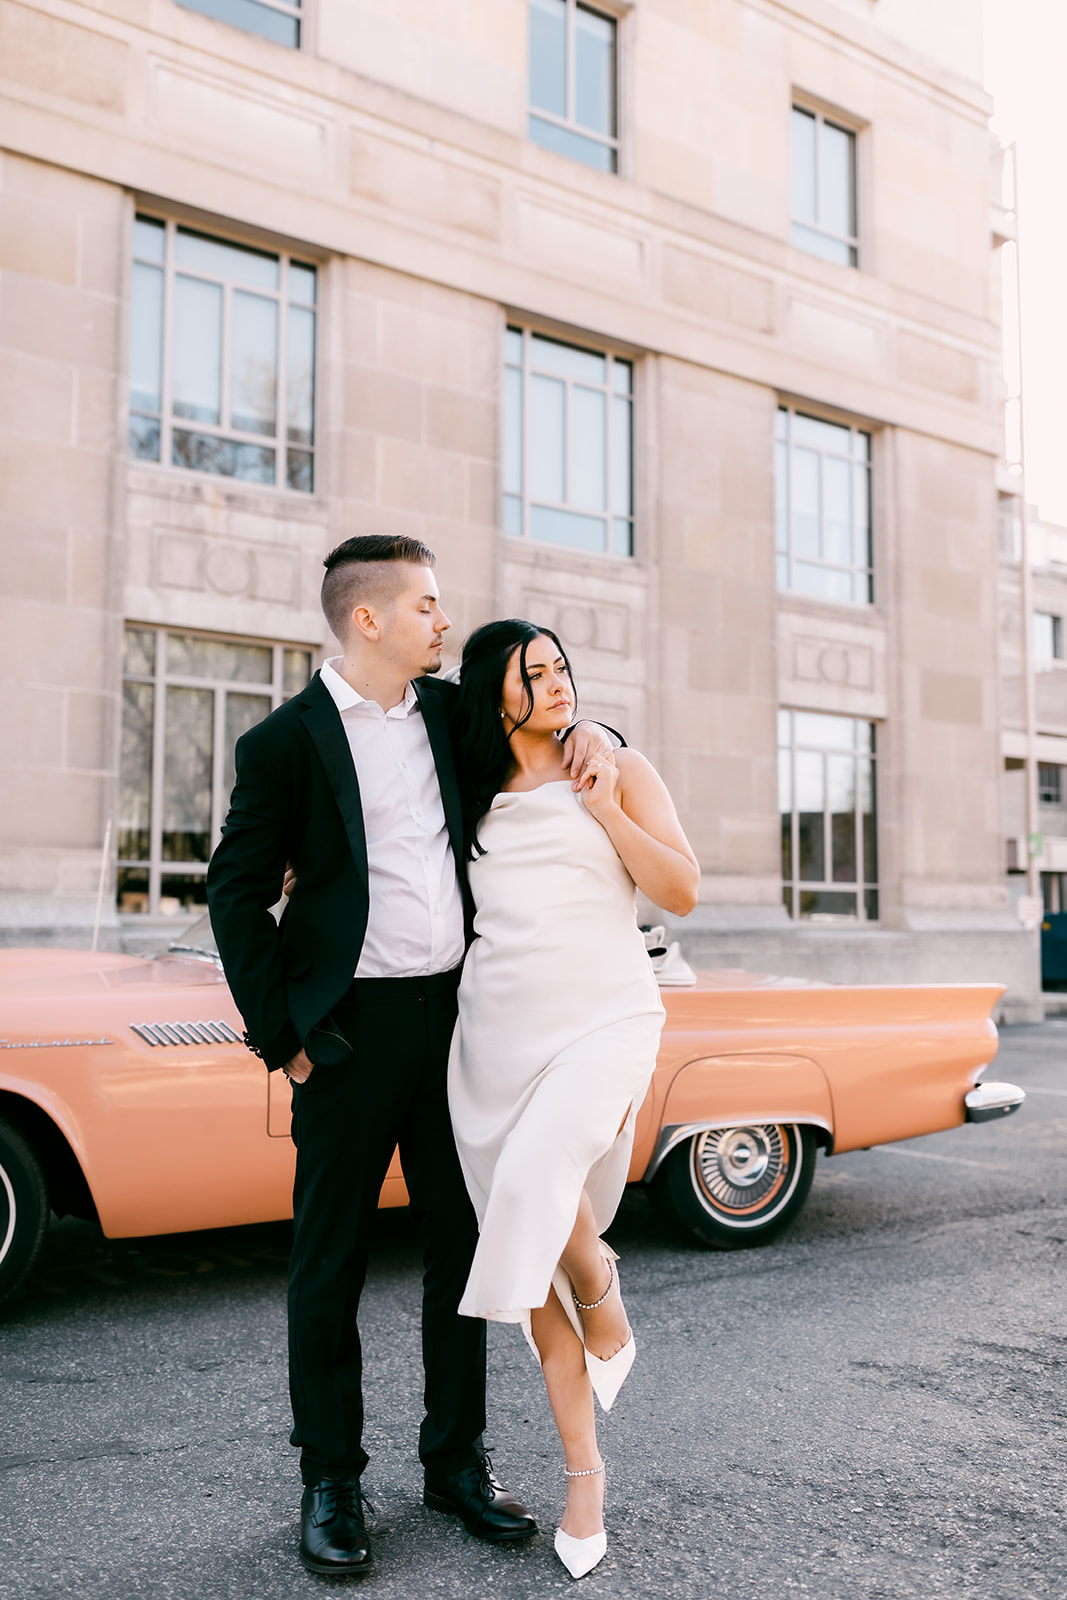 Vintage Classic Car Engagement Session in Downtown Boise, Idaho 